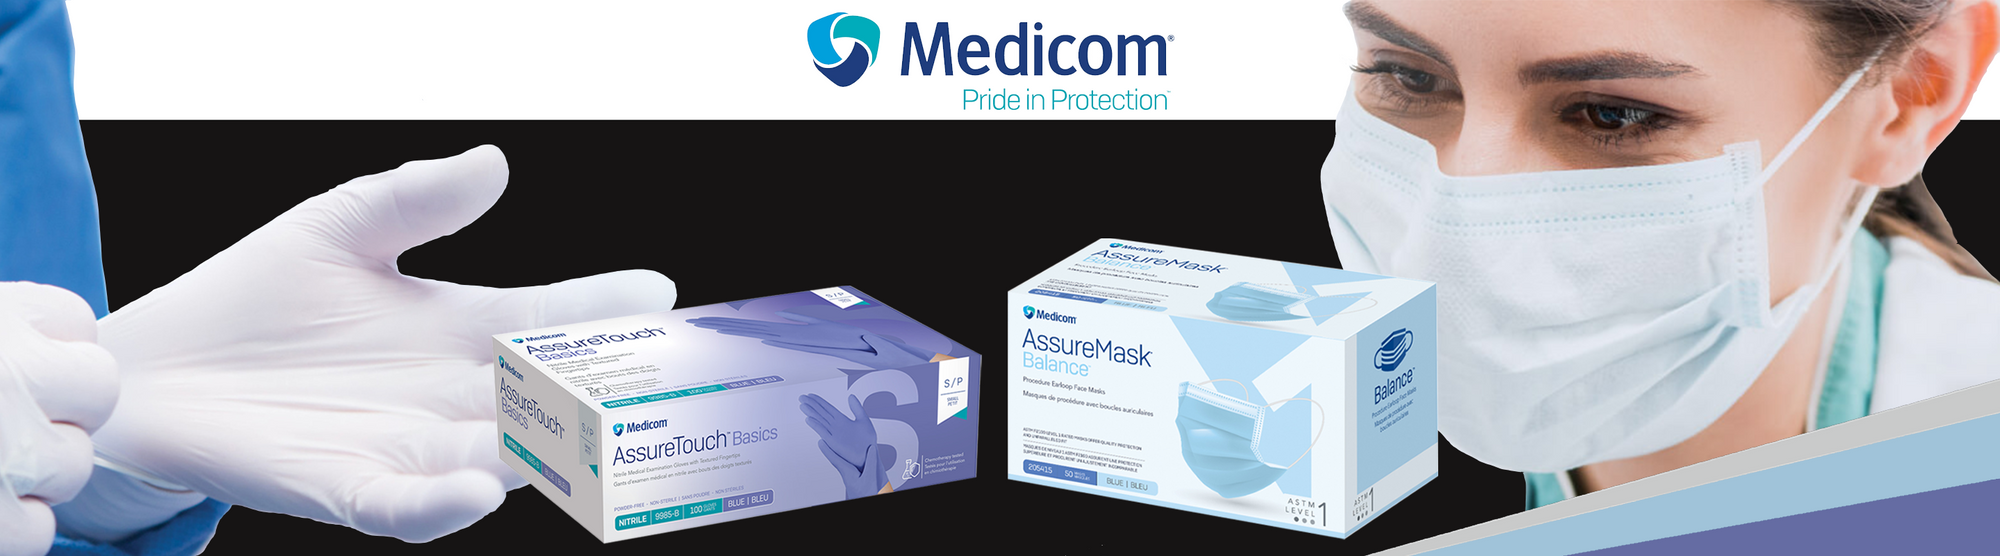 Medicom Canada Gloves, Masks and PPE Products available from DBiomed banner